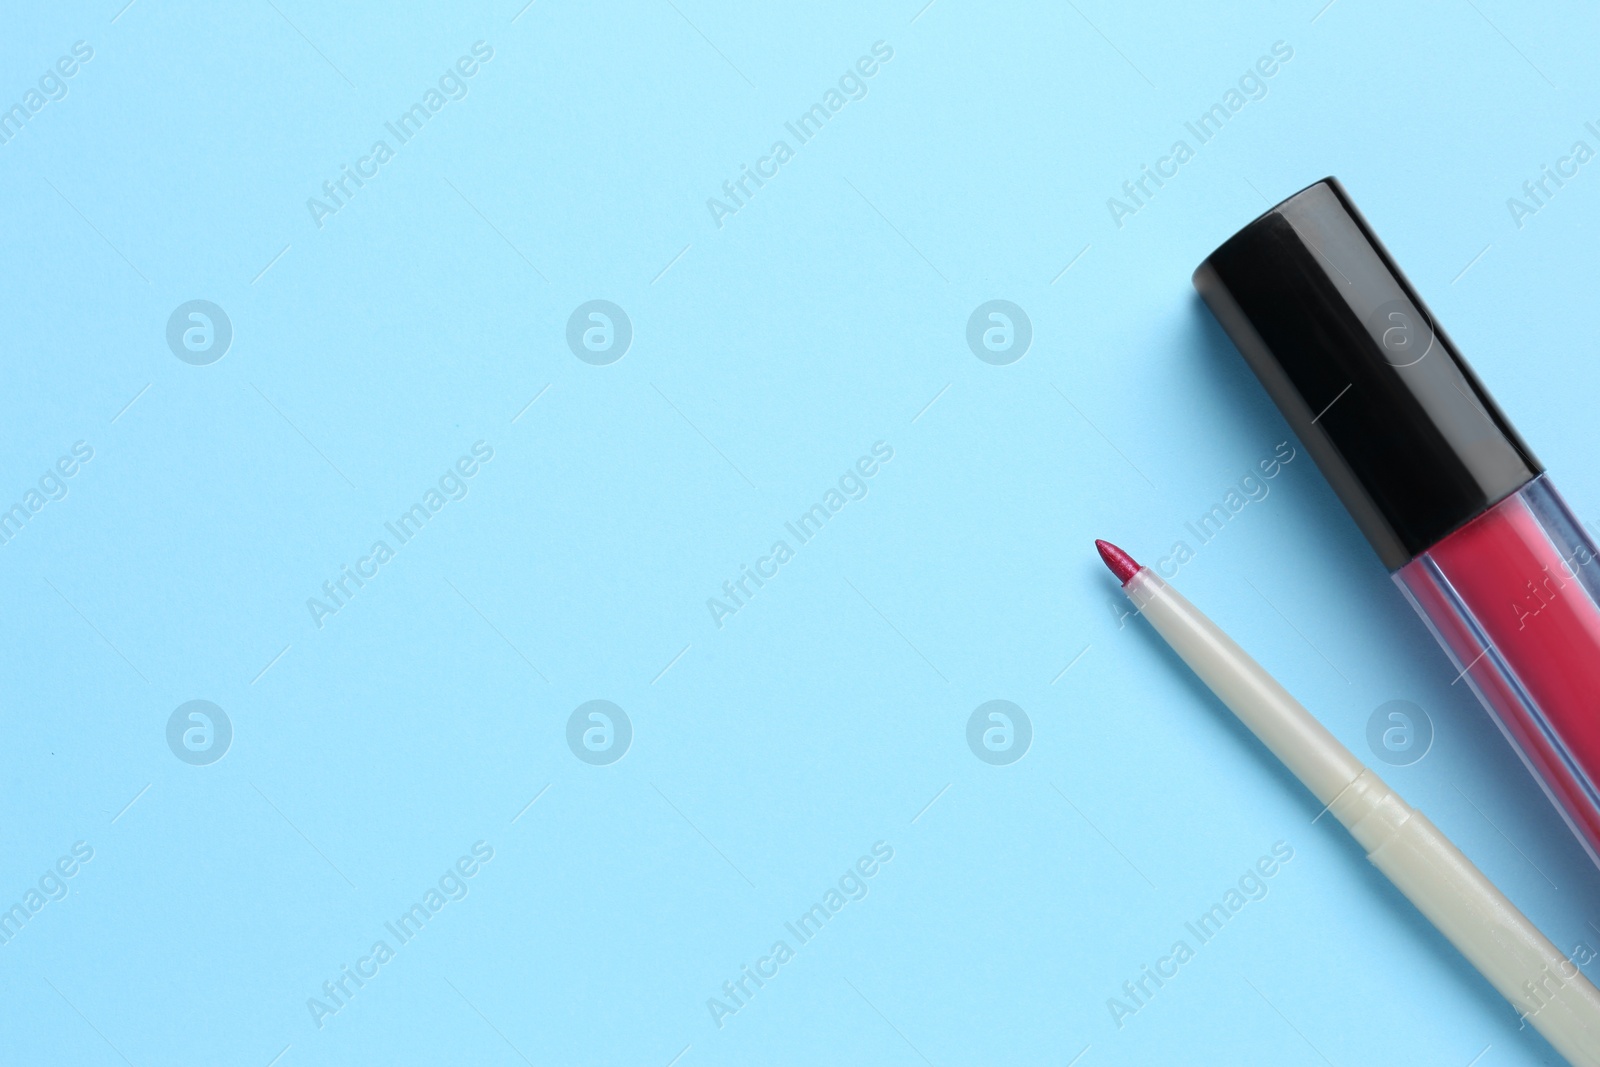 Photo of Lip pencil and liquid lipstick on light blue background, flat lay with space for text. Cosmetic product